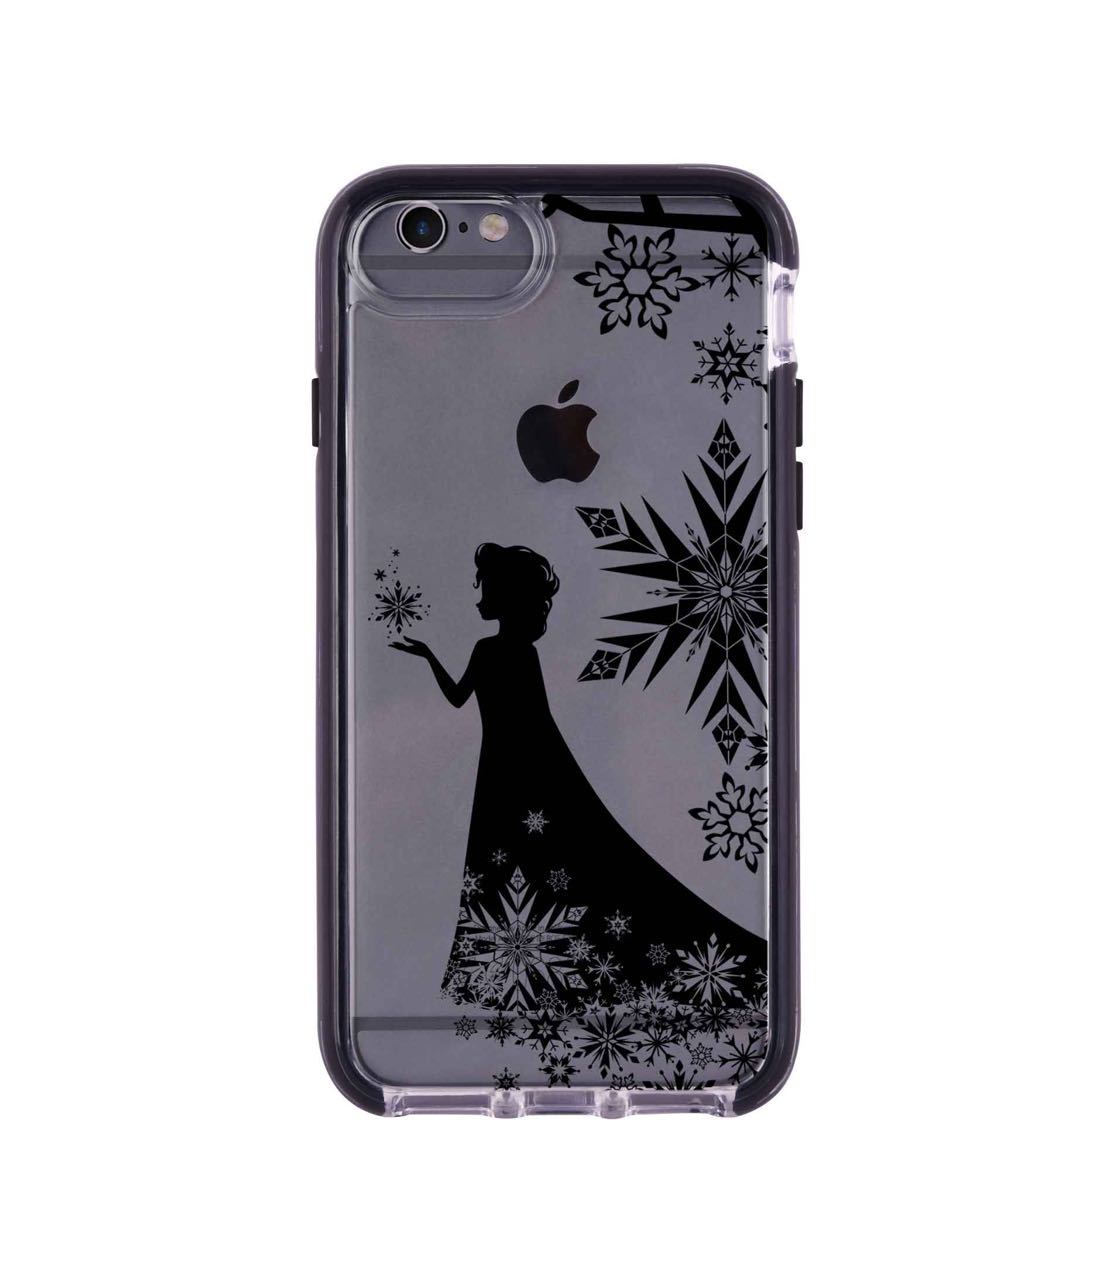 Elsa Silhouette - Extreme Phone Case for iPhone 6 Plus